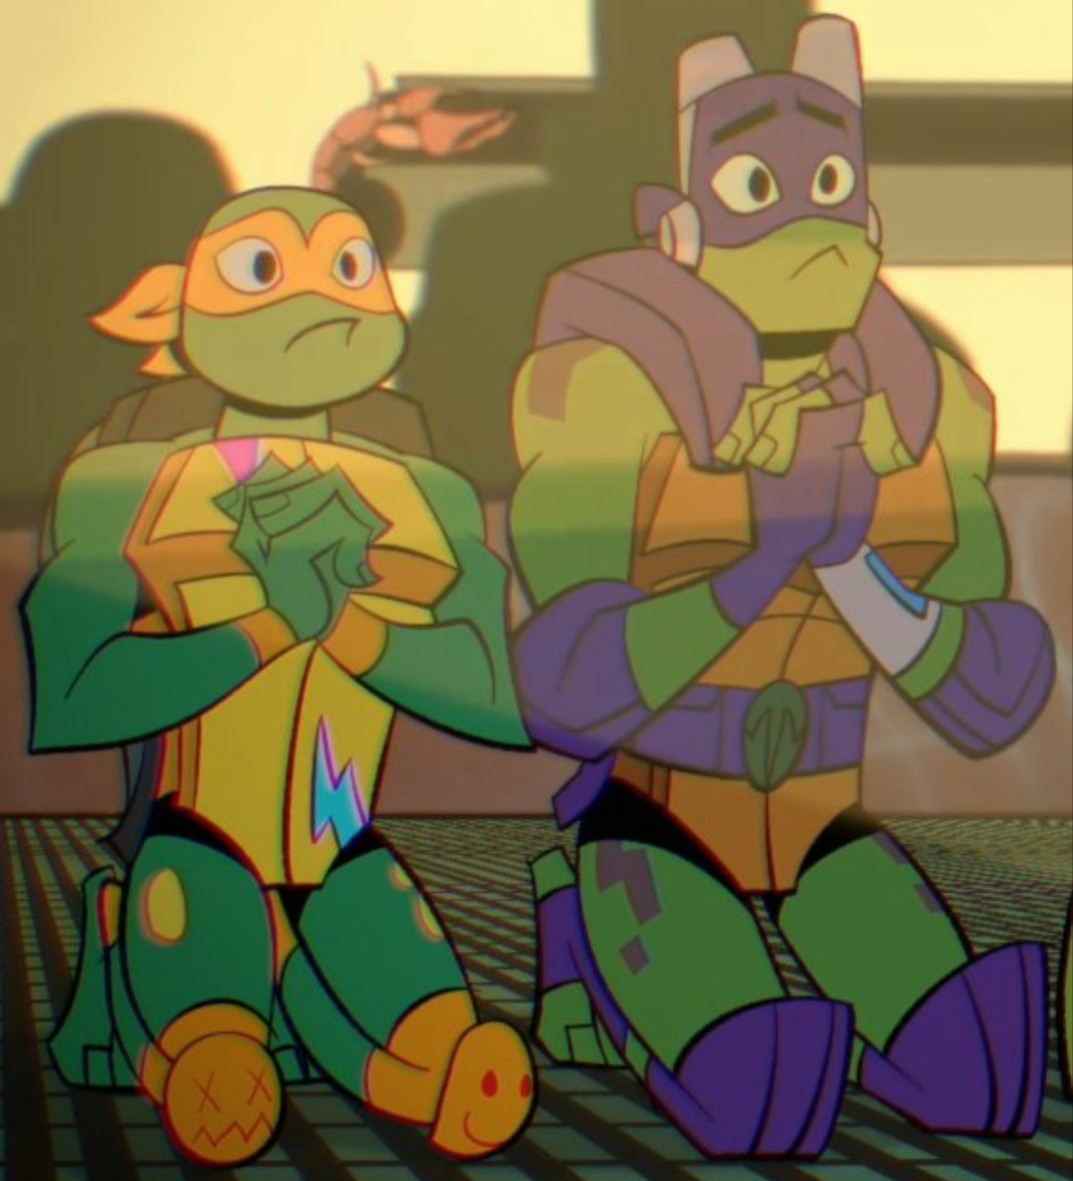 @paramountplus @TMNT Okay, I know I'm spamming a little now but, Paramount, we've had Rise trending over 25+ times so far this year, we're working hard to bring in new fans and there's so, so, SO many of us asking for a season 3. I haven't seen this for any other iteration.
Please...